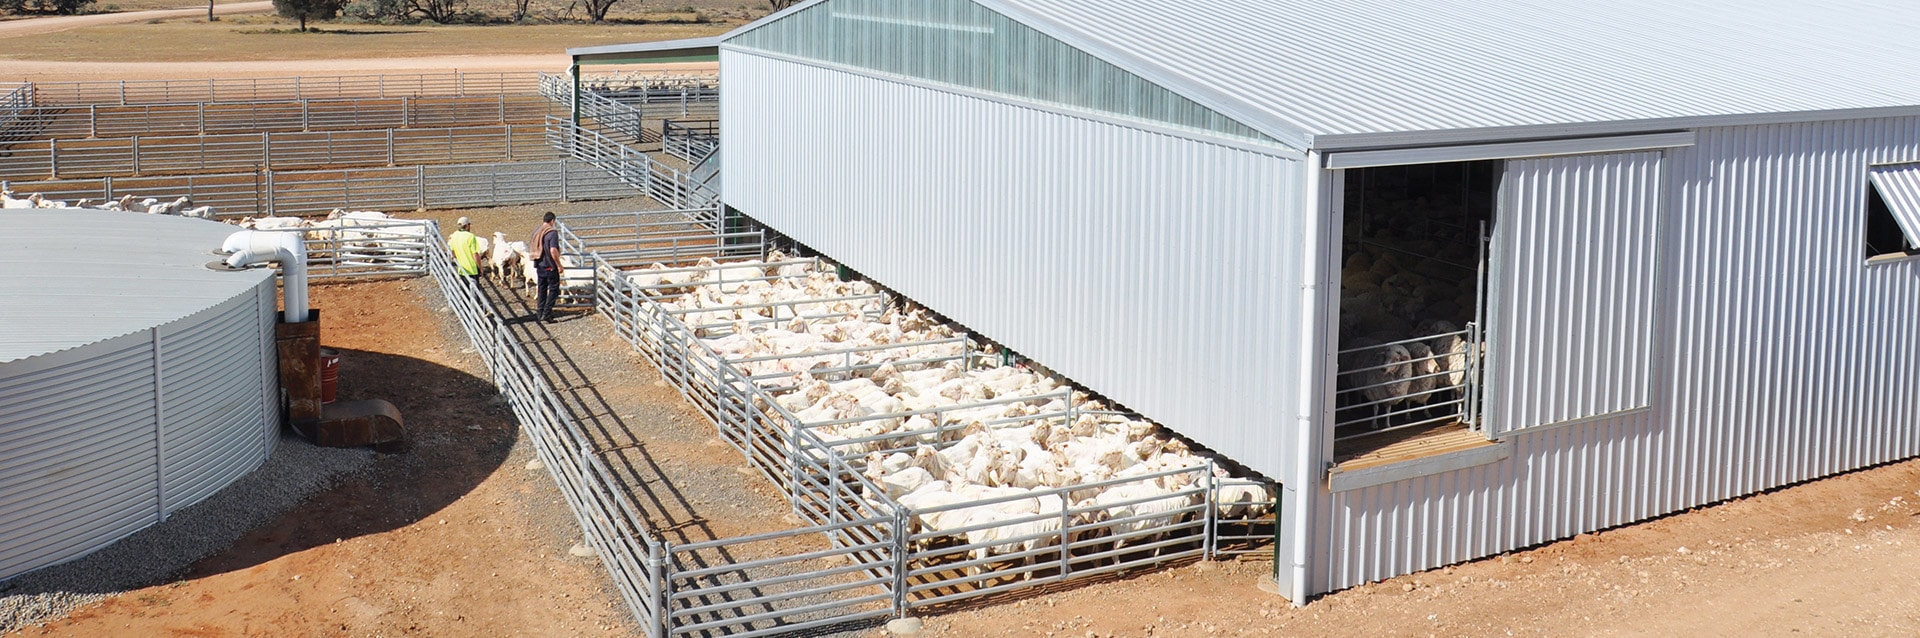 Wool Sheds | Sheering Shed Designs & Features | ProWay